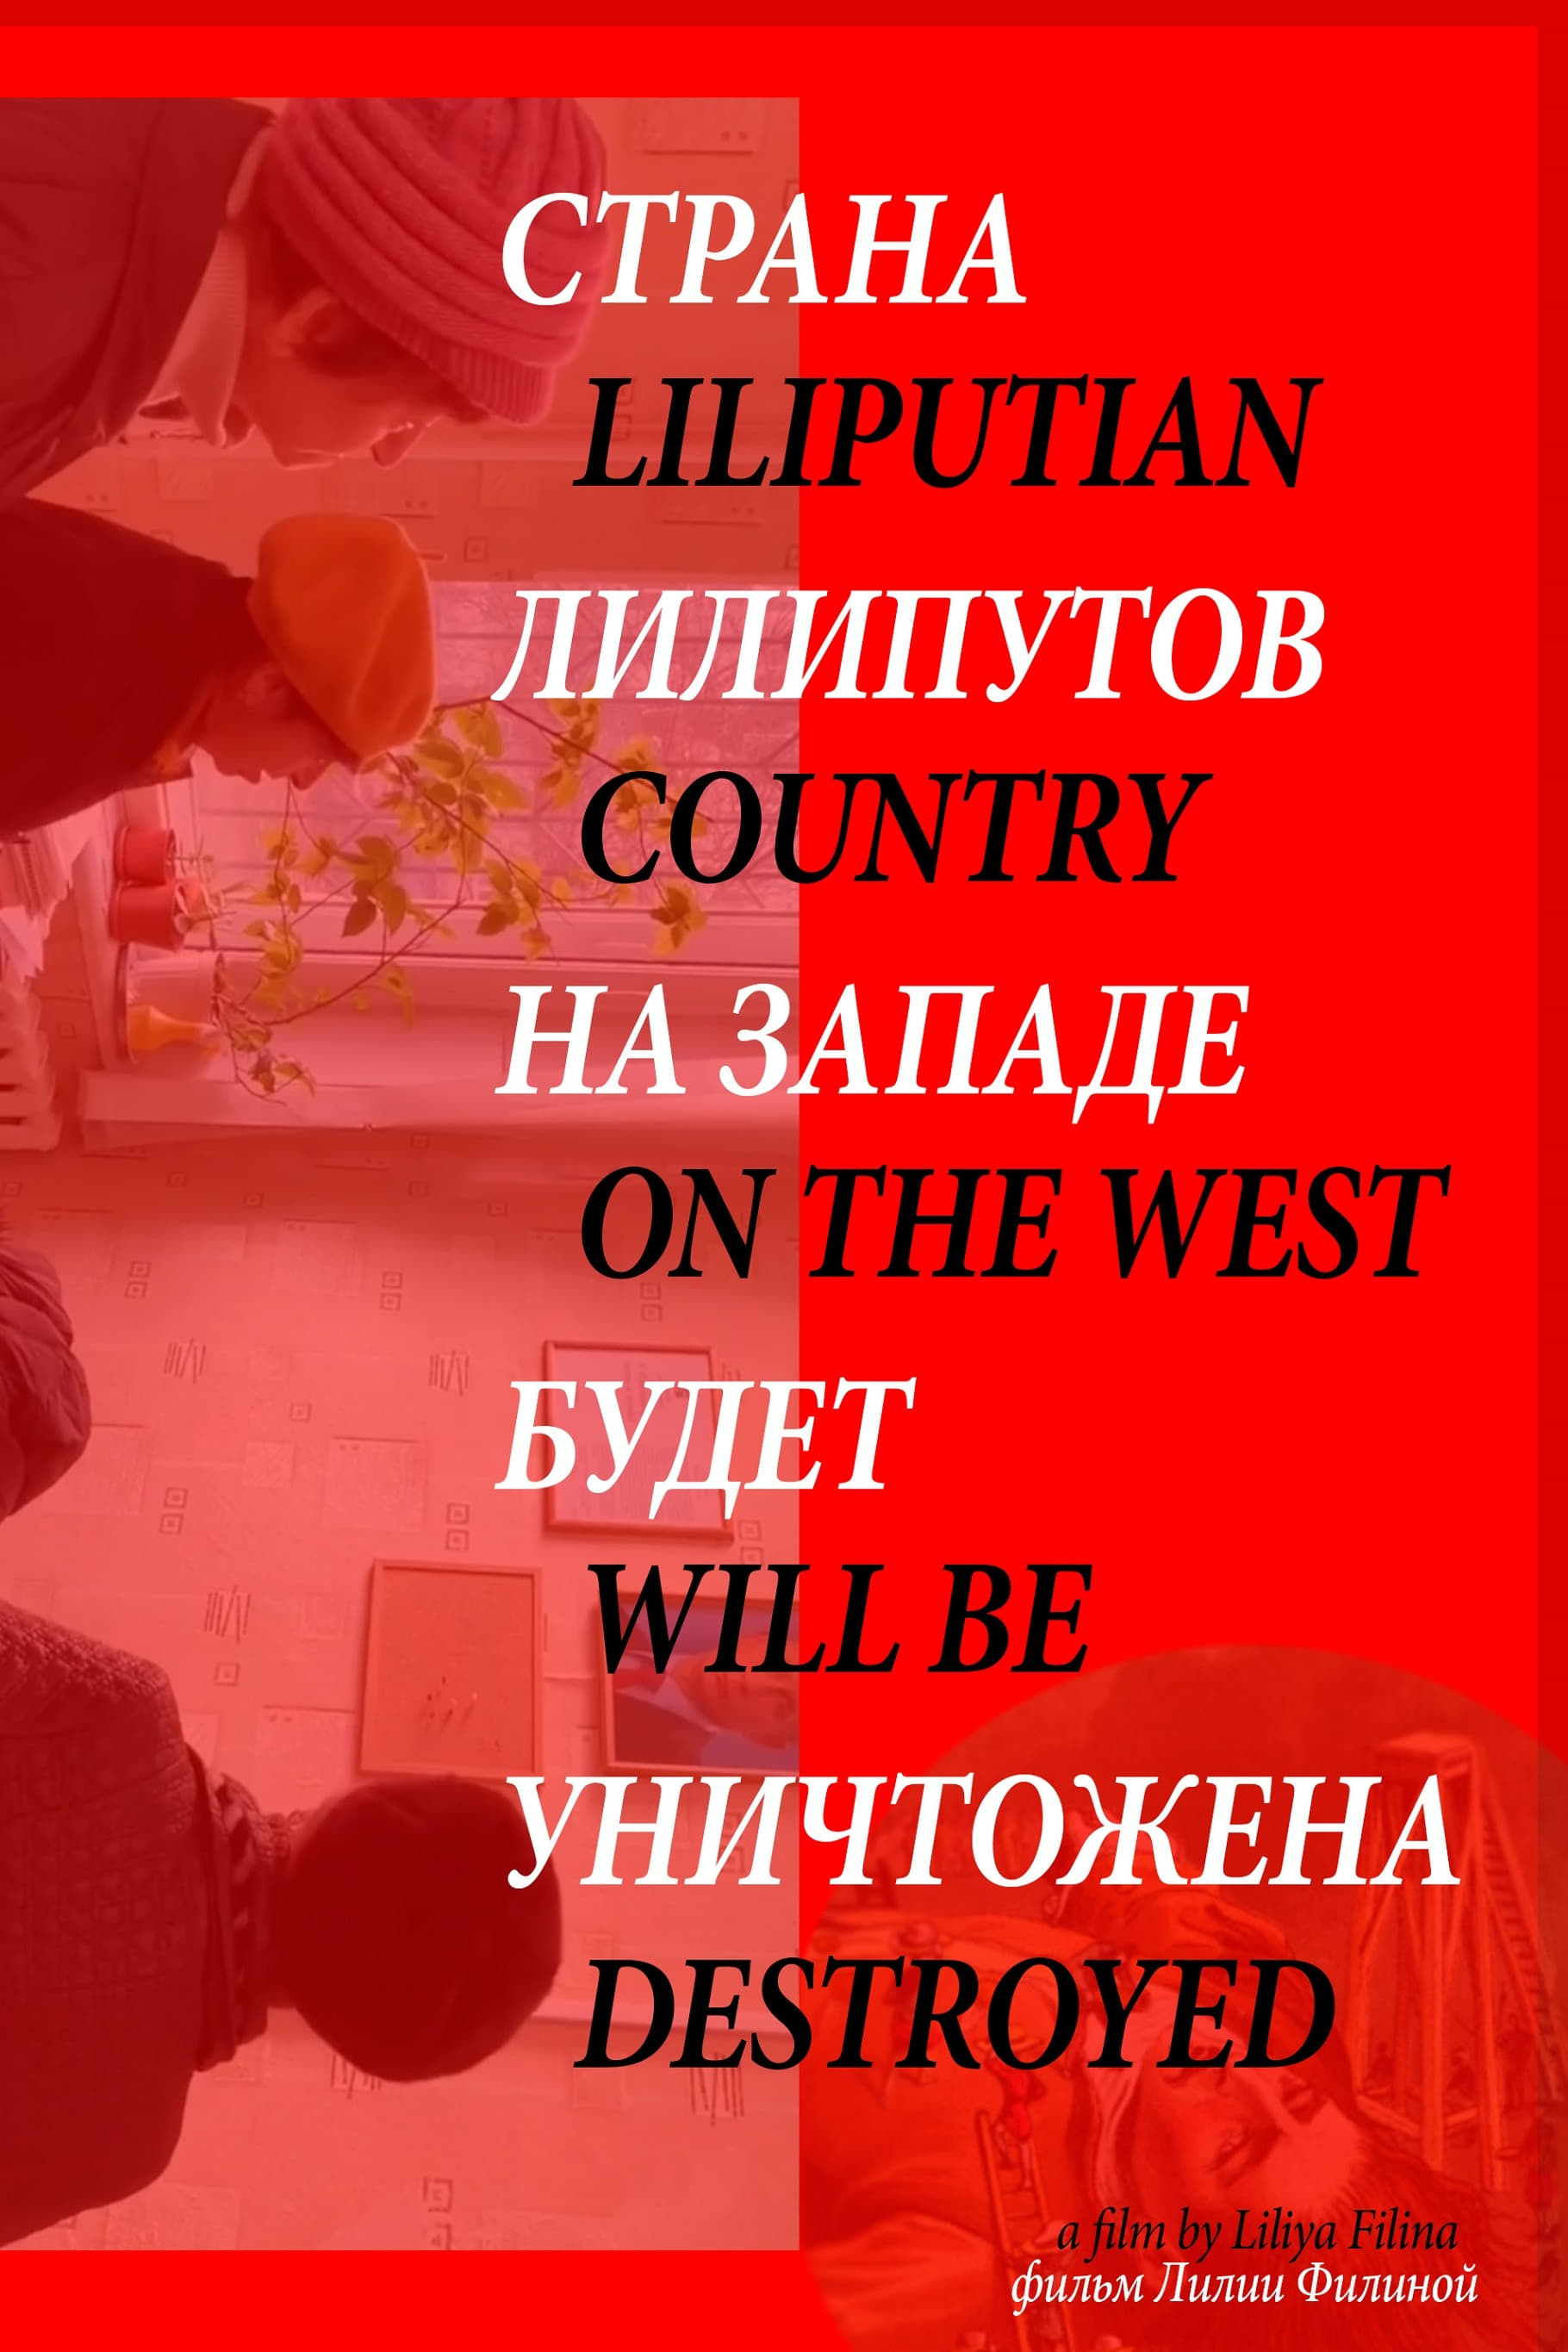 Liliputian Country on the West Will be Destroyed